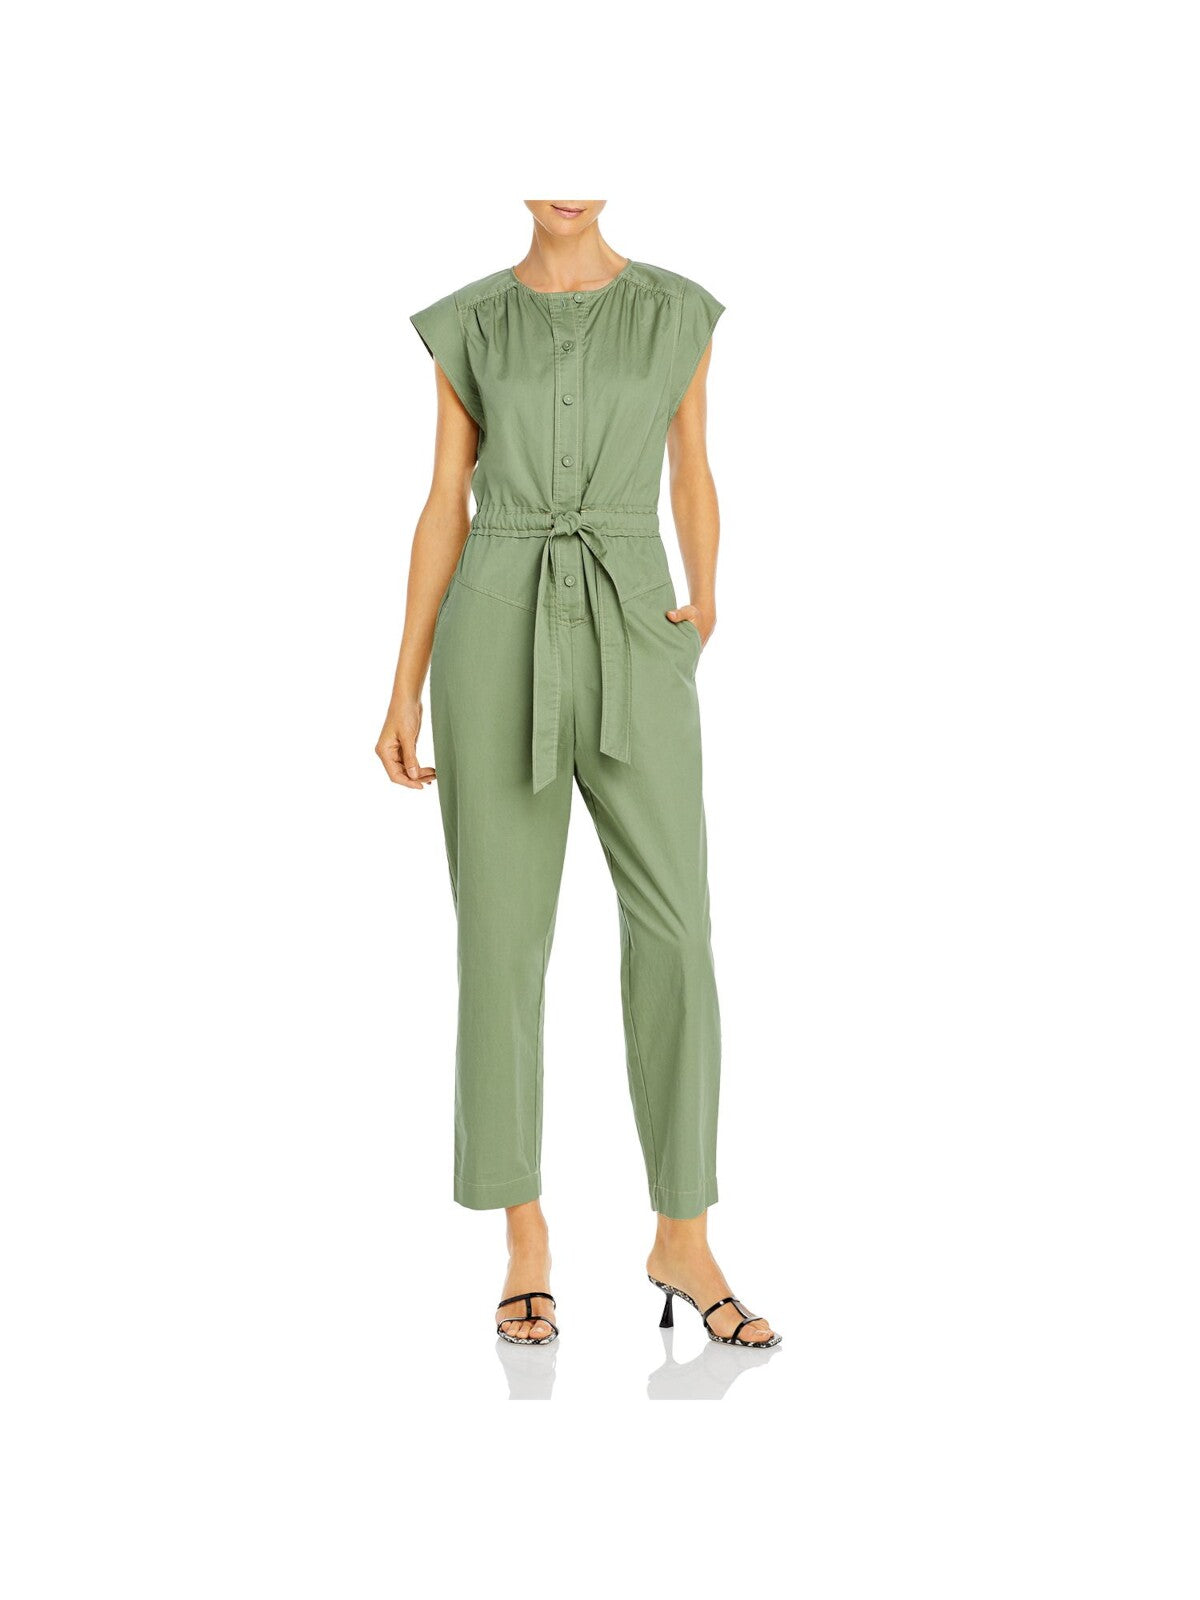 LA VIE BY REBECCA TAYLOR Womens Green Pocketed Tie Button Pleated Drawstring Cap Sleeve Jewel Neck Wear To Work Jumpsuit S